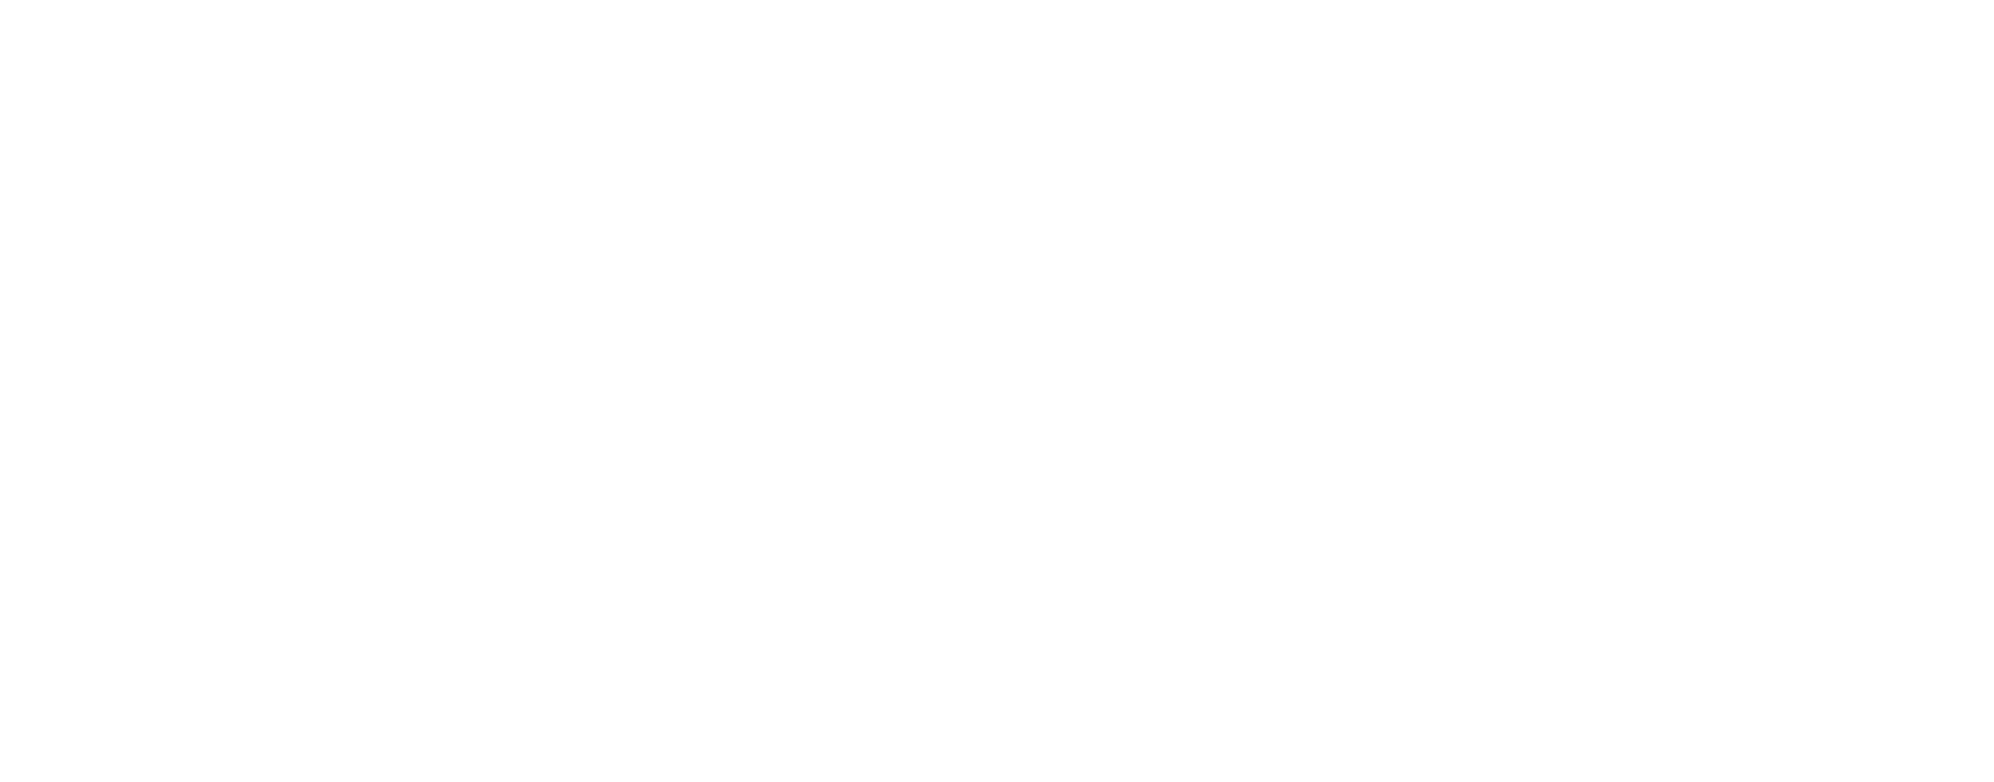 OpenFF Toolkit 0.11.0rc3+18.g228f532c.dirty documentation logo